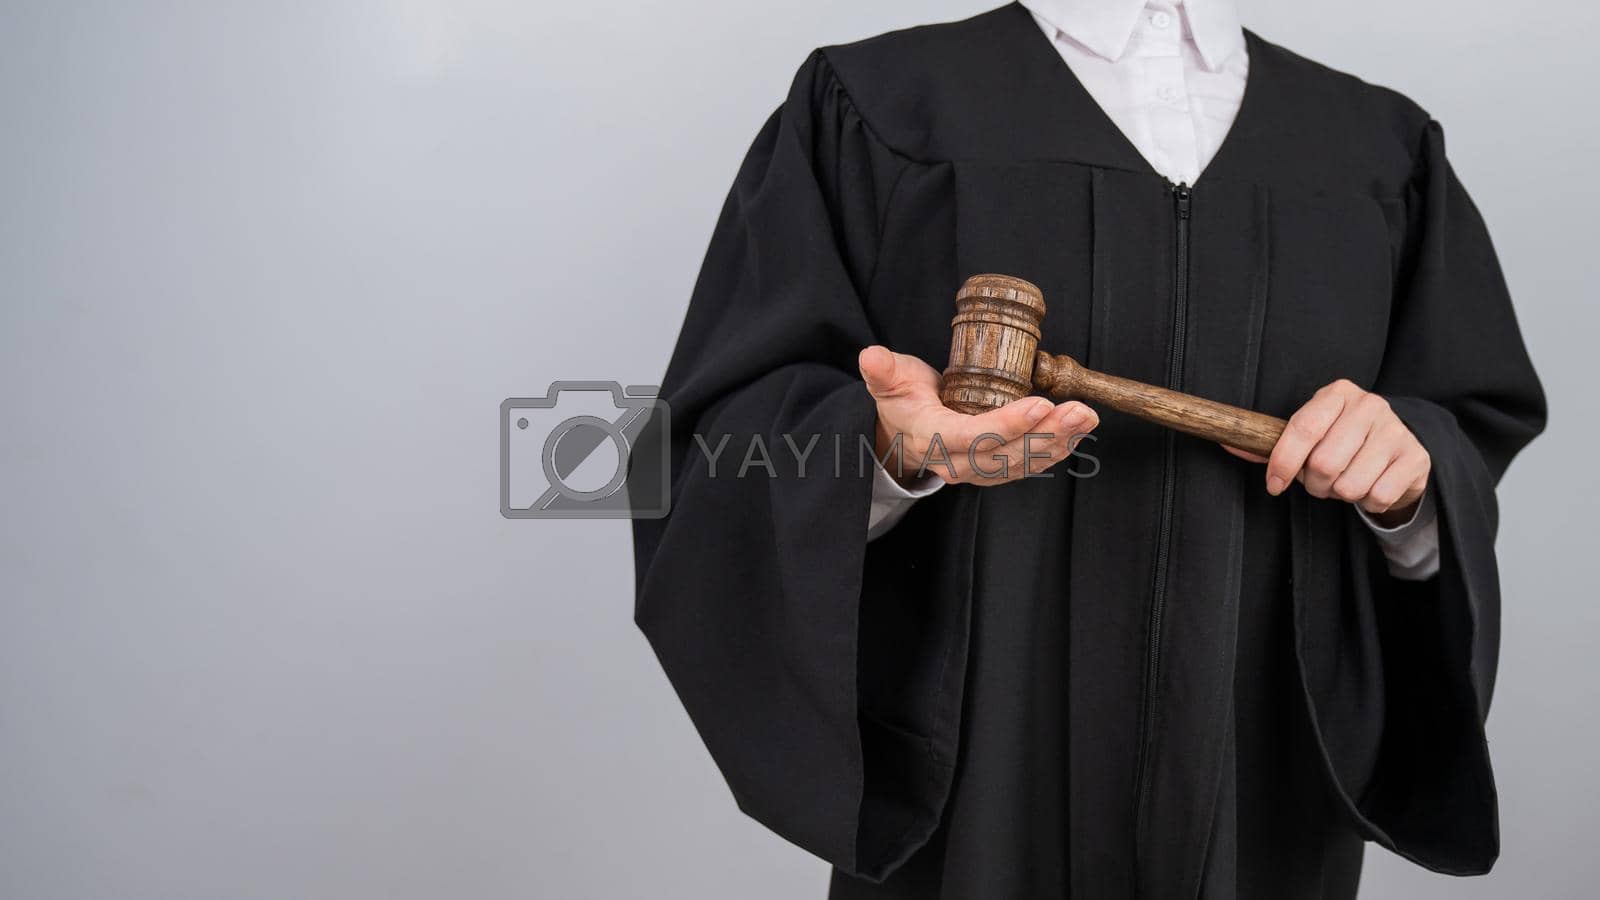 Royalty free image of Faceless female judge in a robe holding a court gavel. by mrwed54